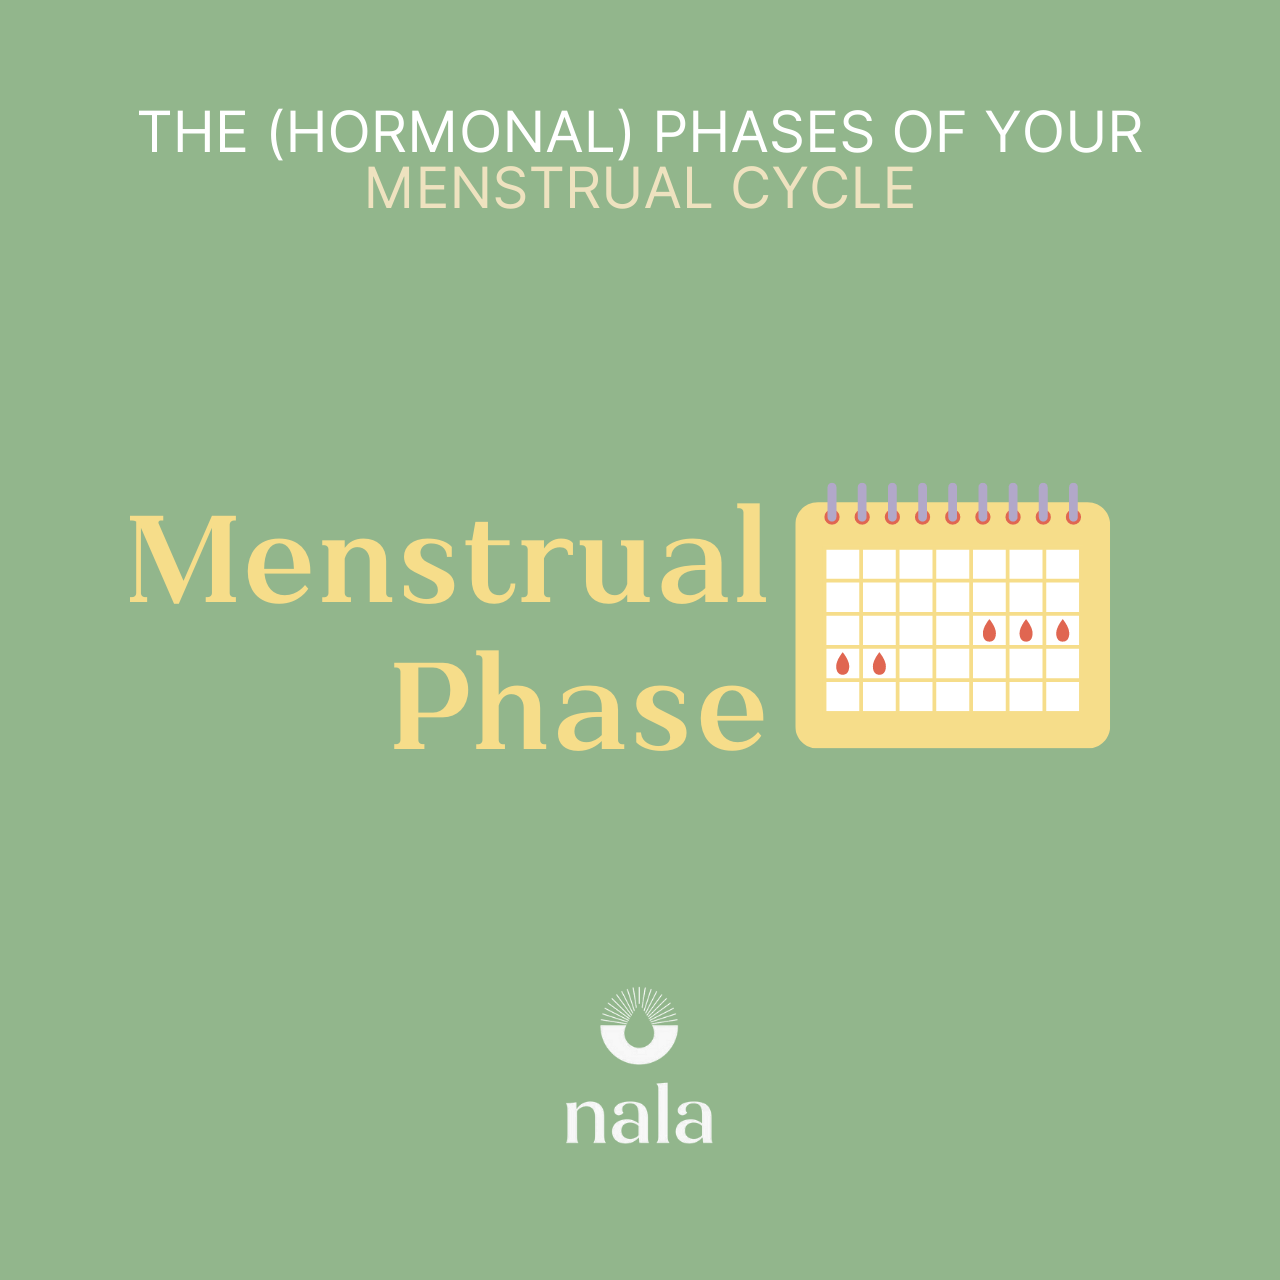 Menstrual Phase: The most famous phase 🩸